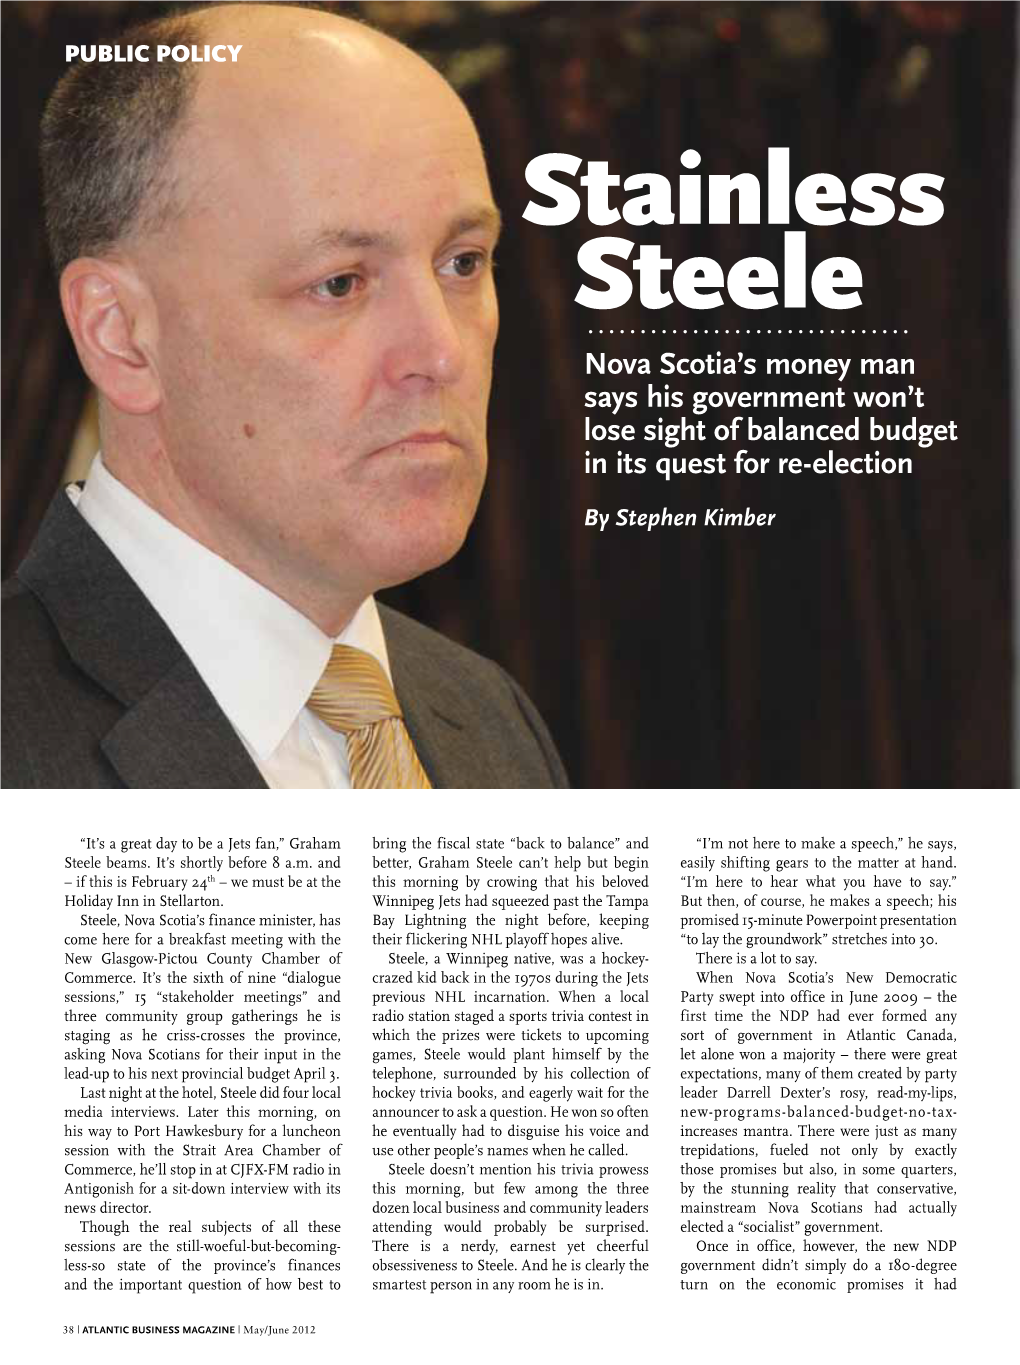 Stainless Steele Nova Scotia’S Money Man Says His Government Won’T Lose Sight of Balanced Budget in Its Quest for Re-Election